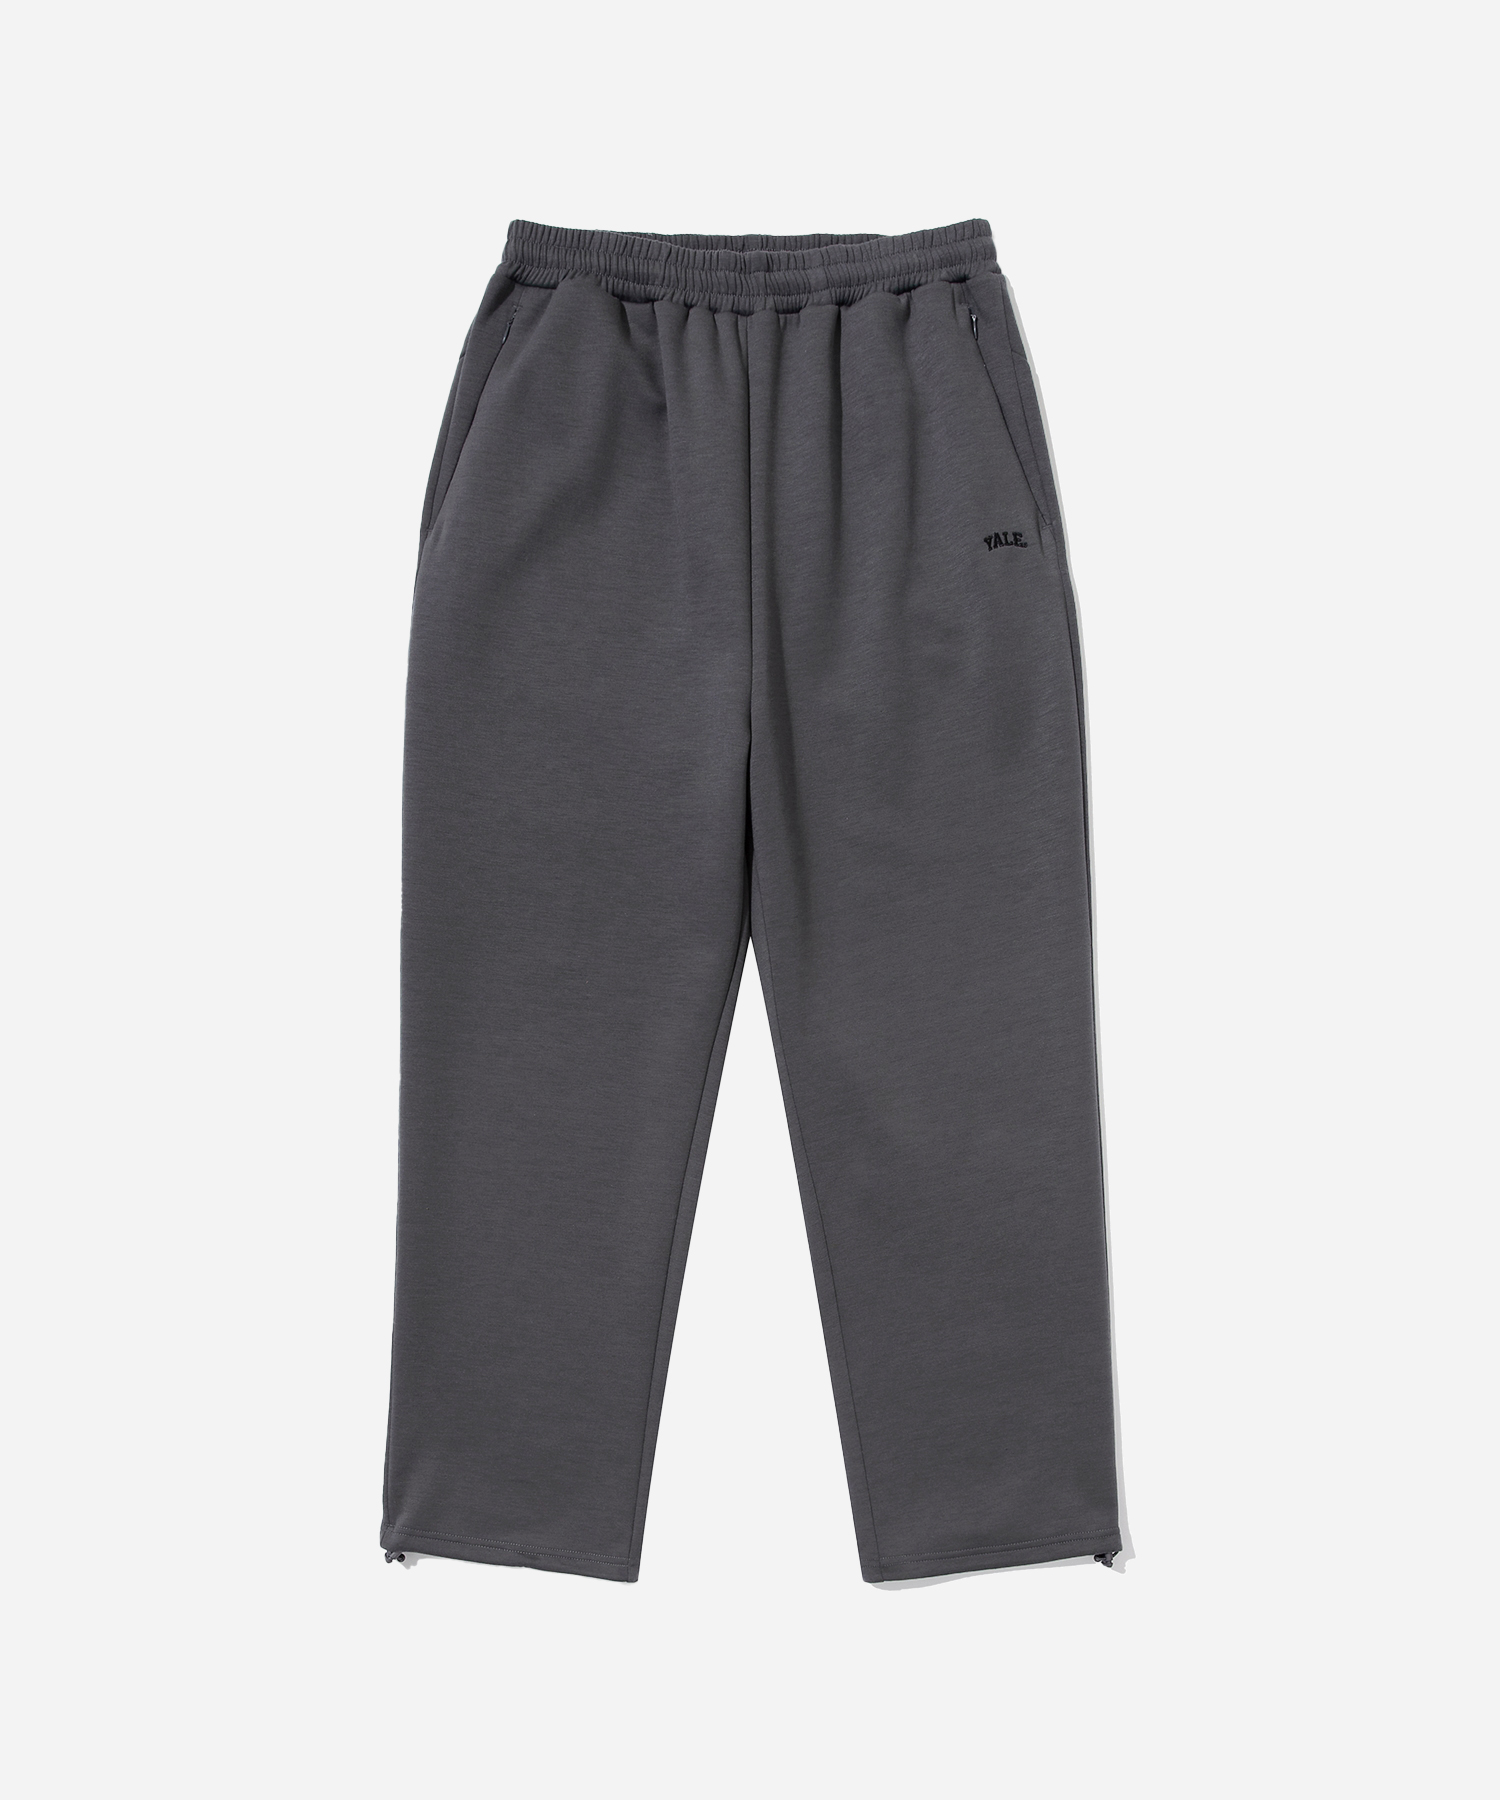 [ONEMILE WEAR] UTILITY WIDE TRACK PANTS CHARCOAL